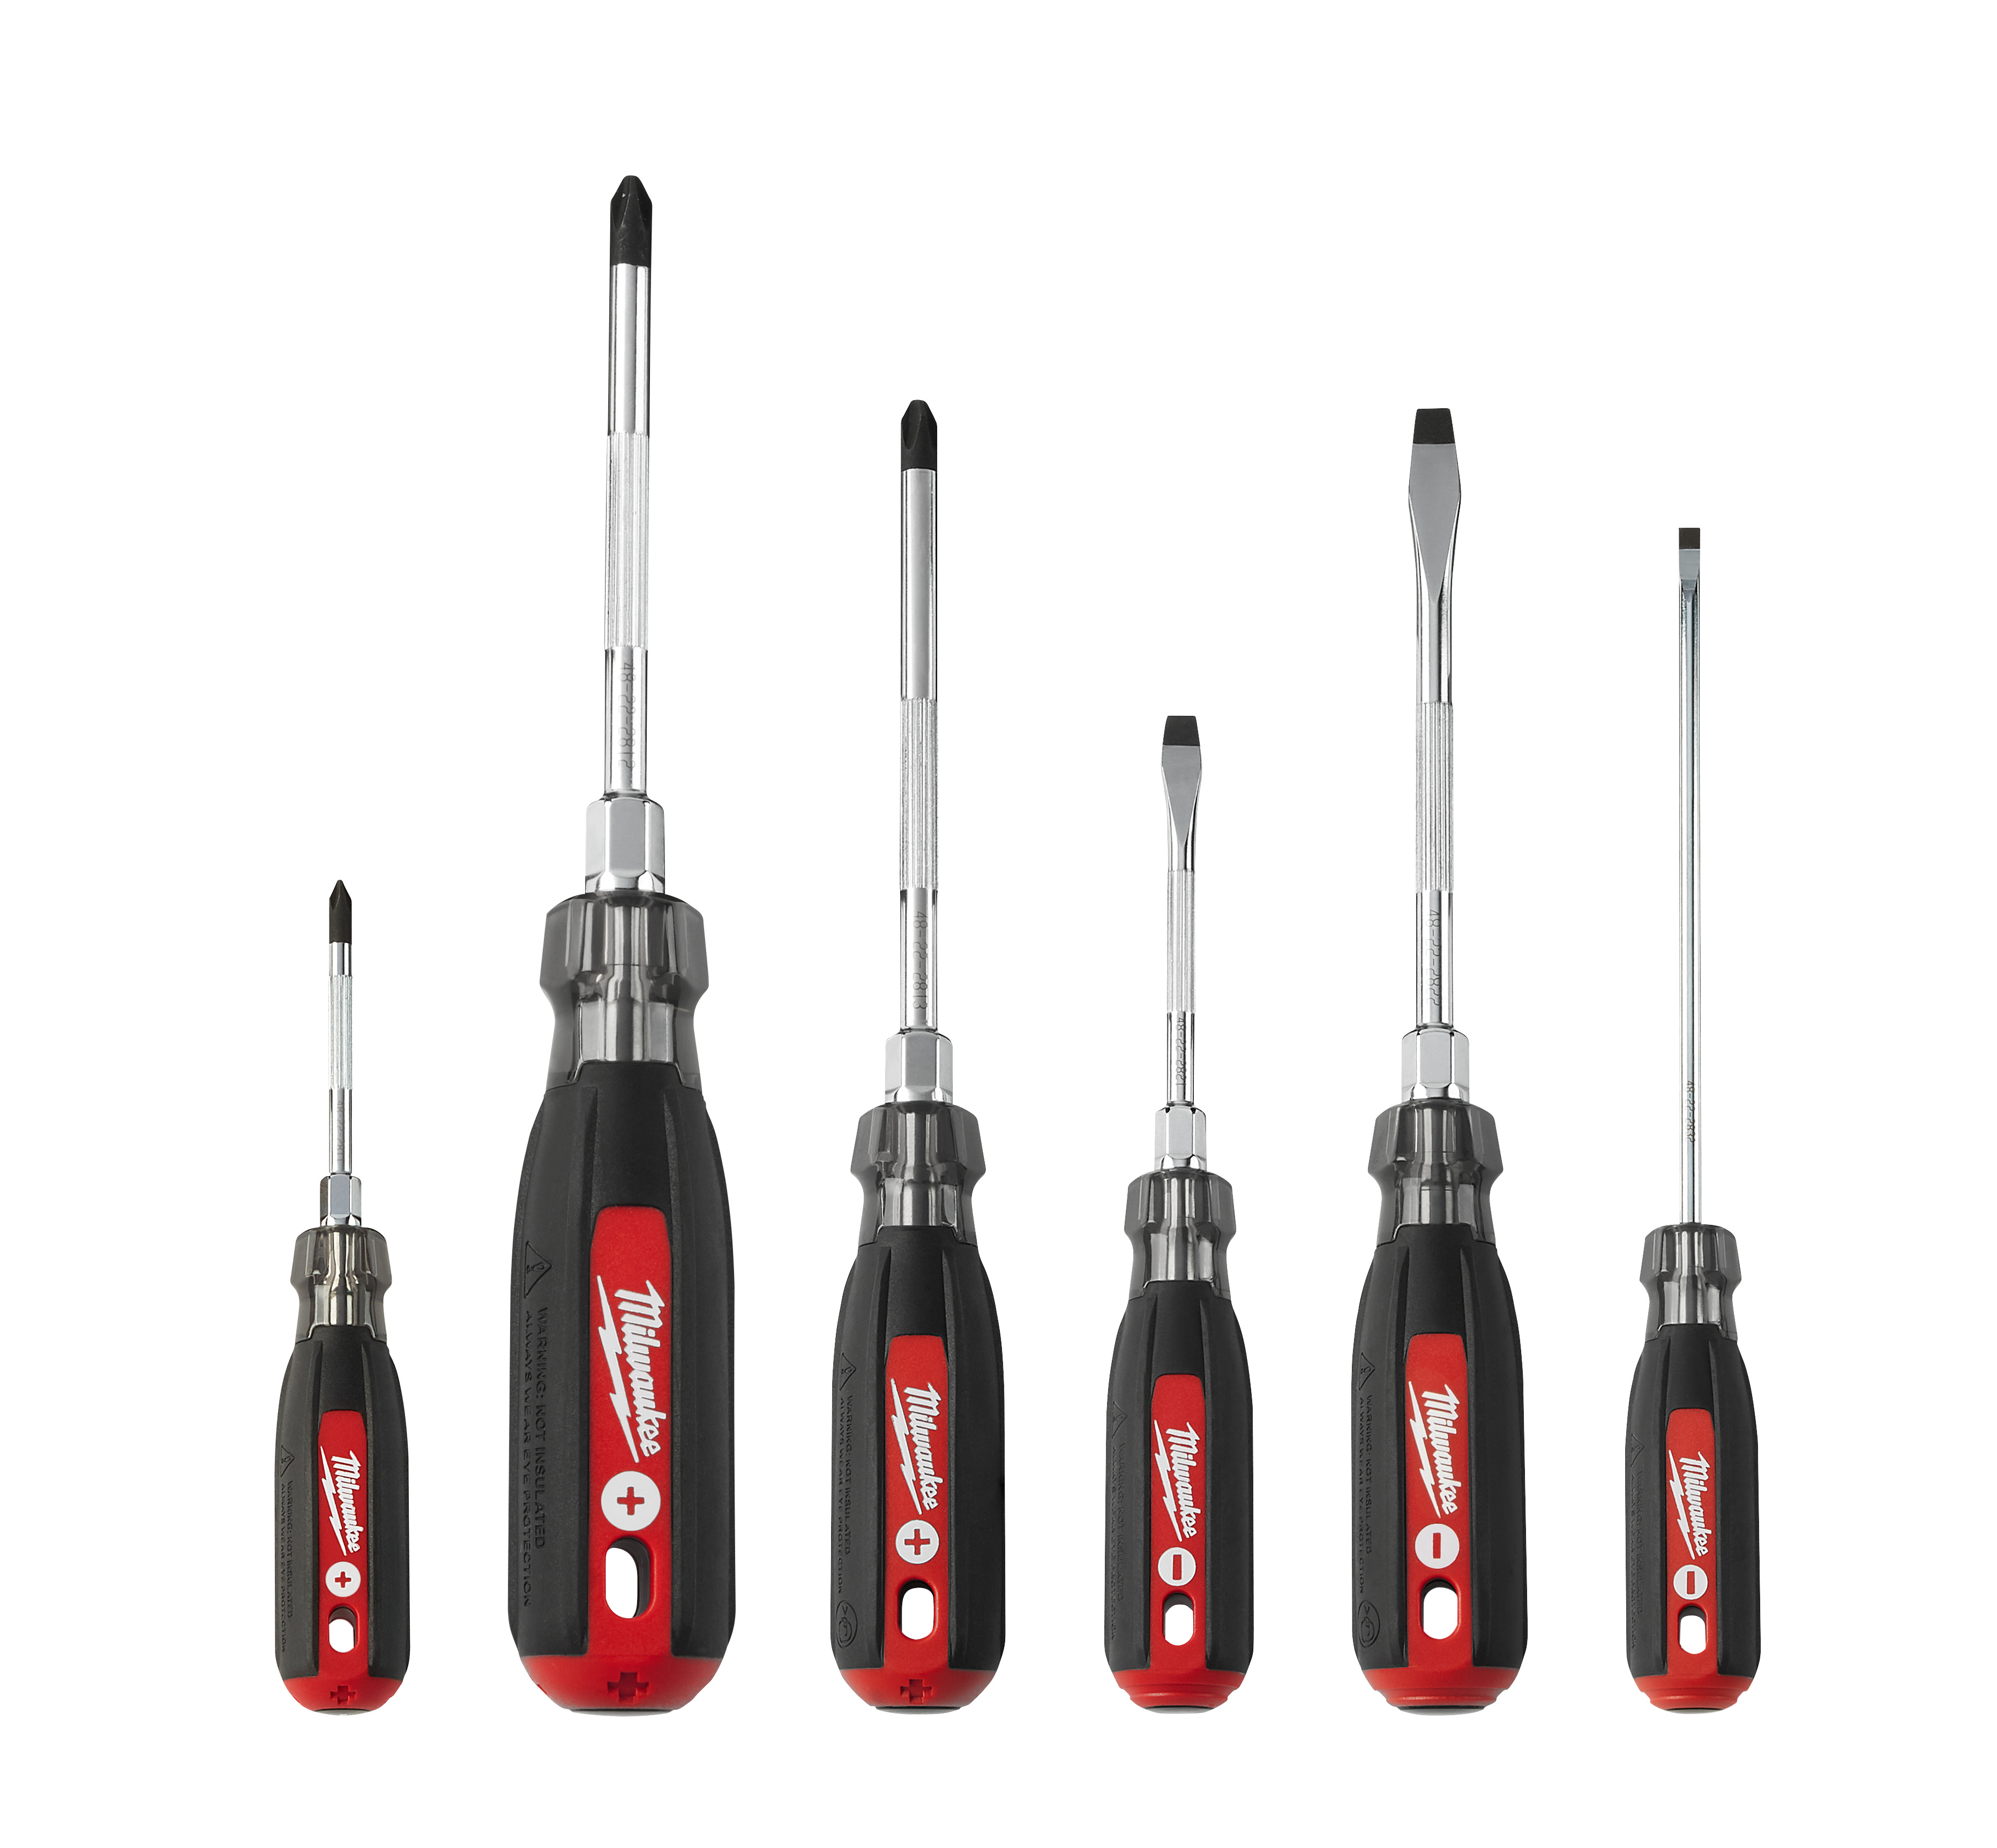 48-22-2886 045242521814 Featuring hardened tips & forged shanks the Milwaukee® 6 piece cushion grip screwdriver set provides professional grade solutions and durability to the user. The wrench-ready bolster and precision knurling offers users the features needed to increase efficiency and effectiveness. The durable handles feature an anti-peel design.